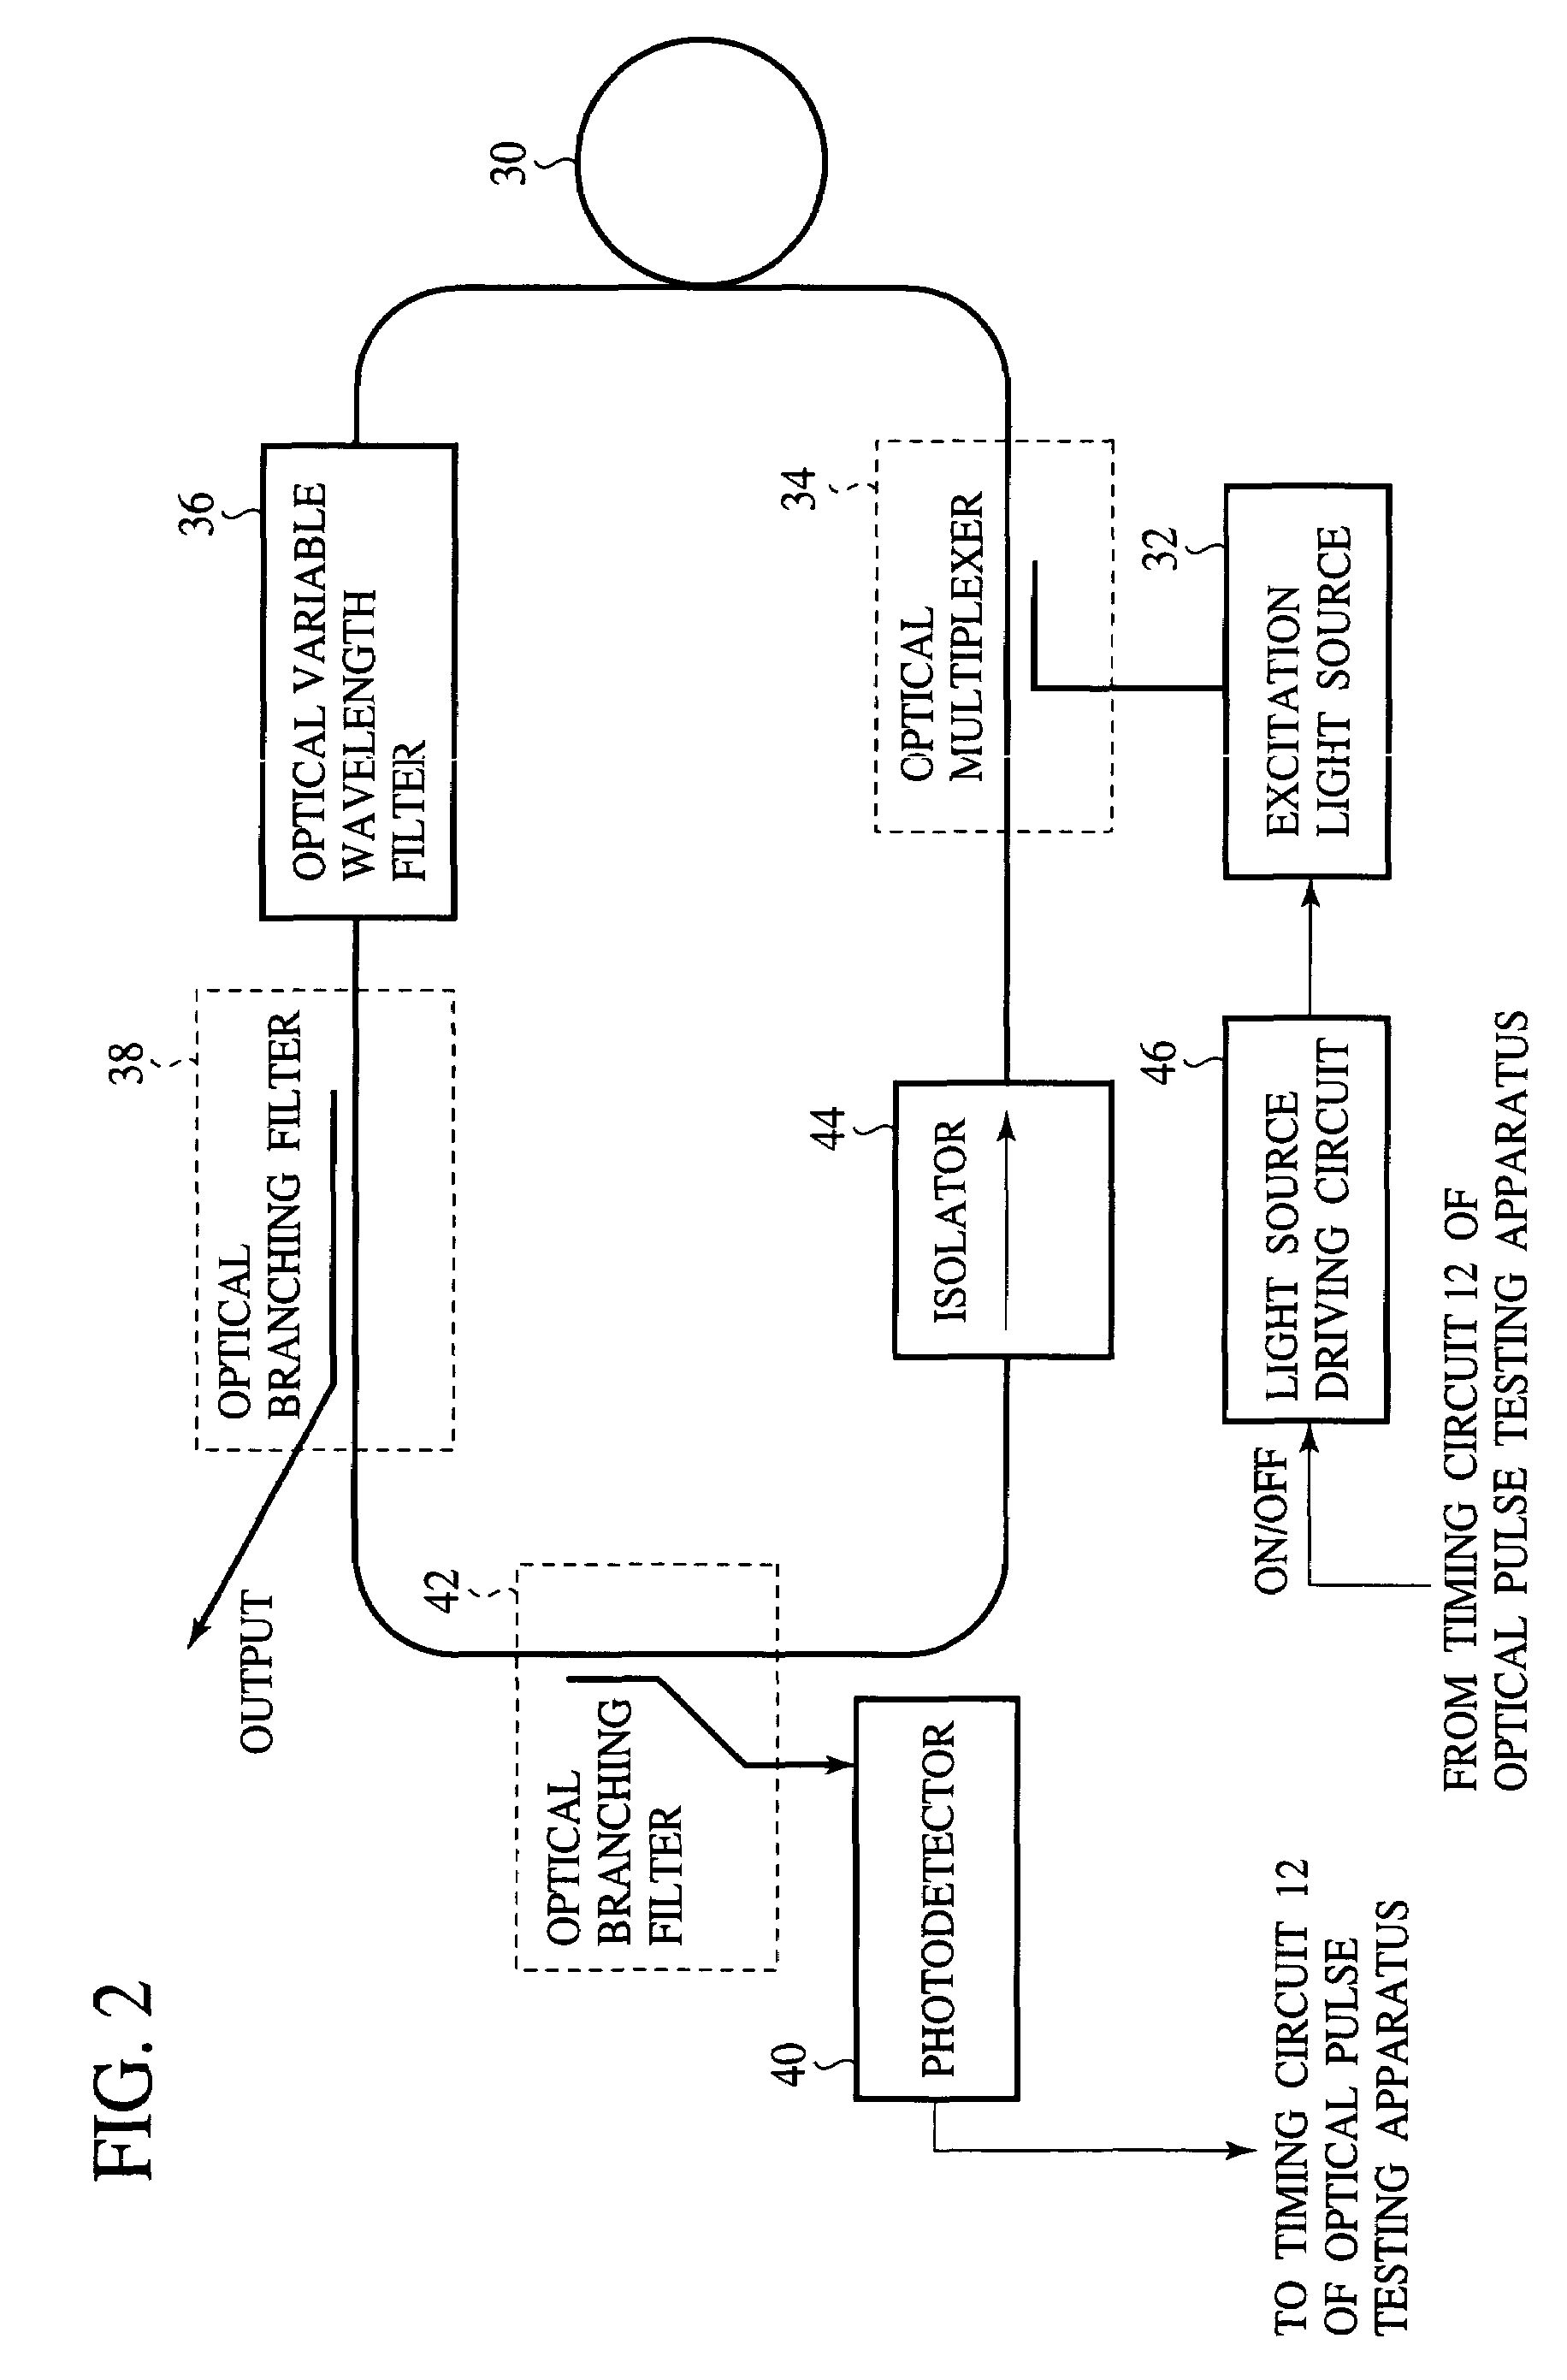 Optical pulse generator and optical pulse testing instrument and method